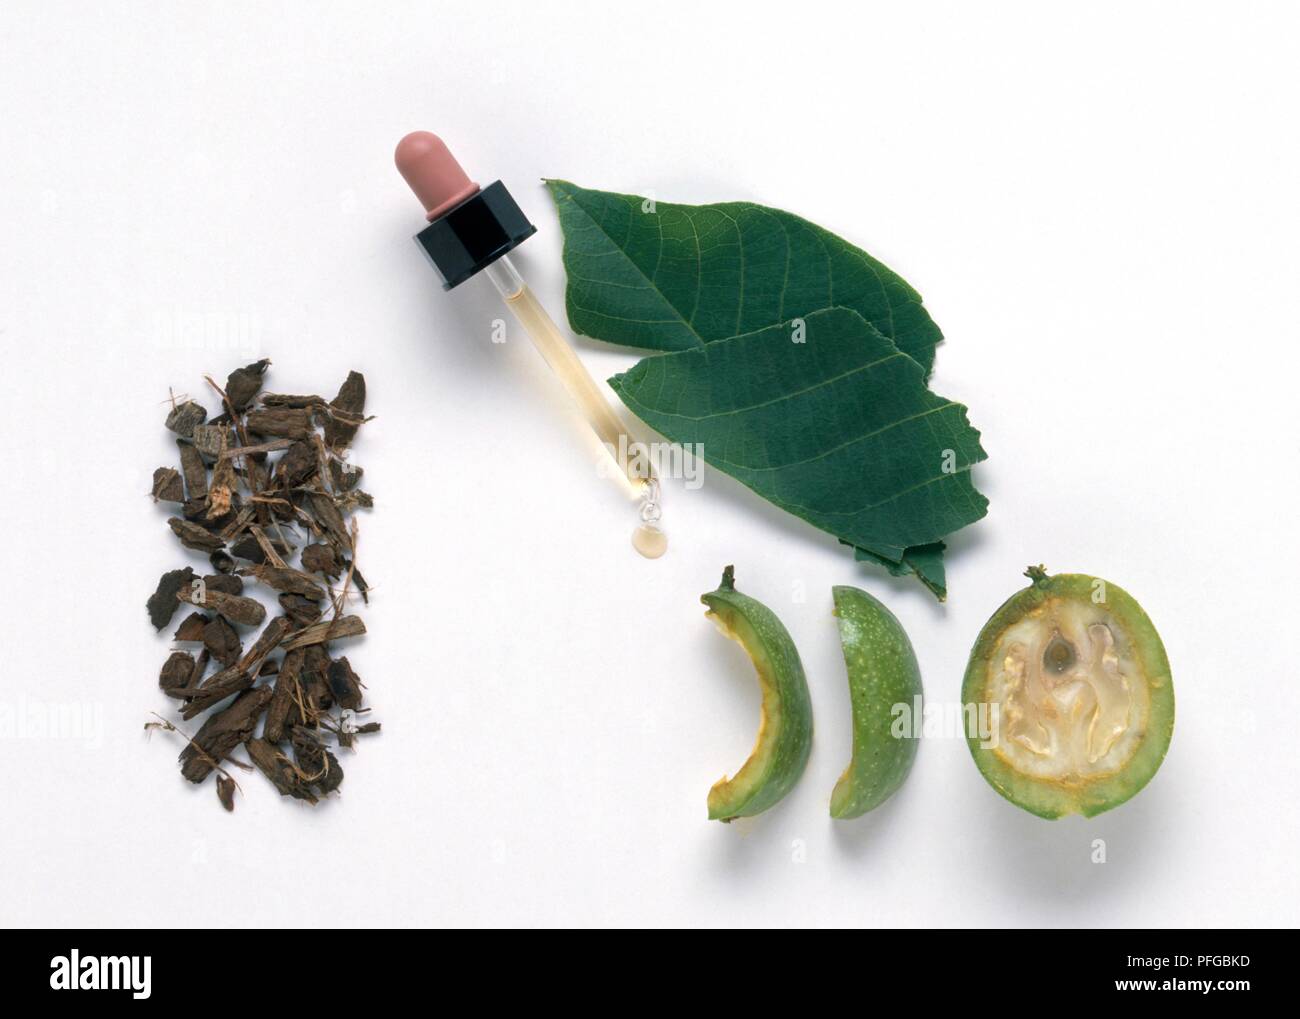 Leaf, walnut half, outer rind and pipette of walnut Bach flower remedy from Juglans regia, and dried inner bark form Juglans cinerea (Walnut tree) Stock Photo